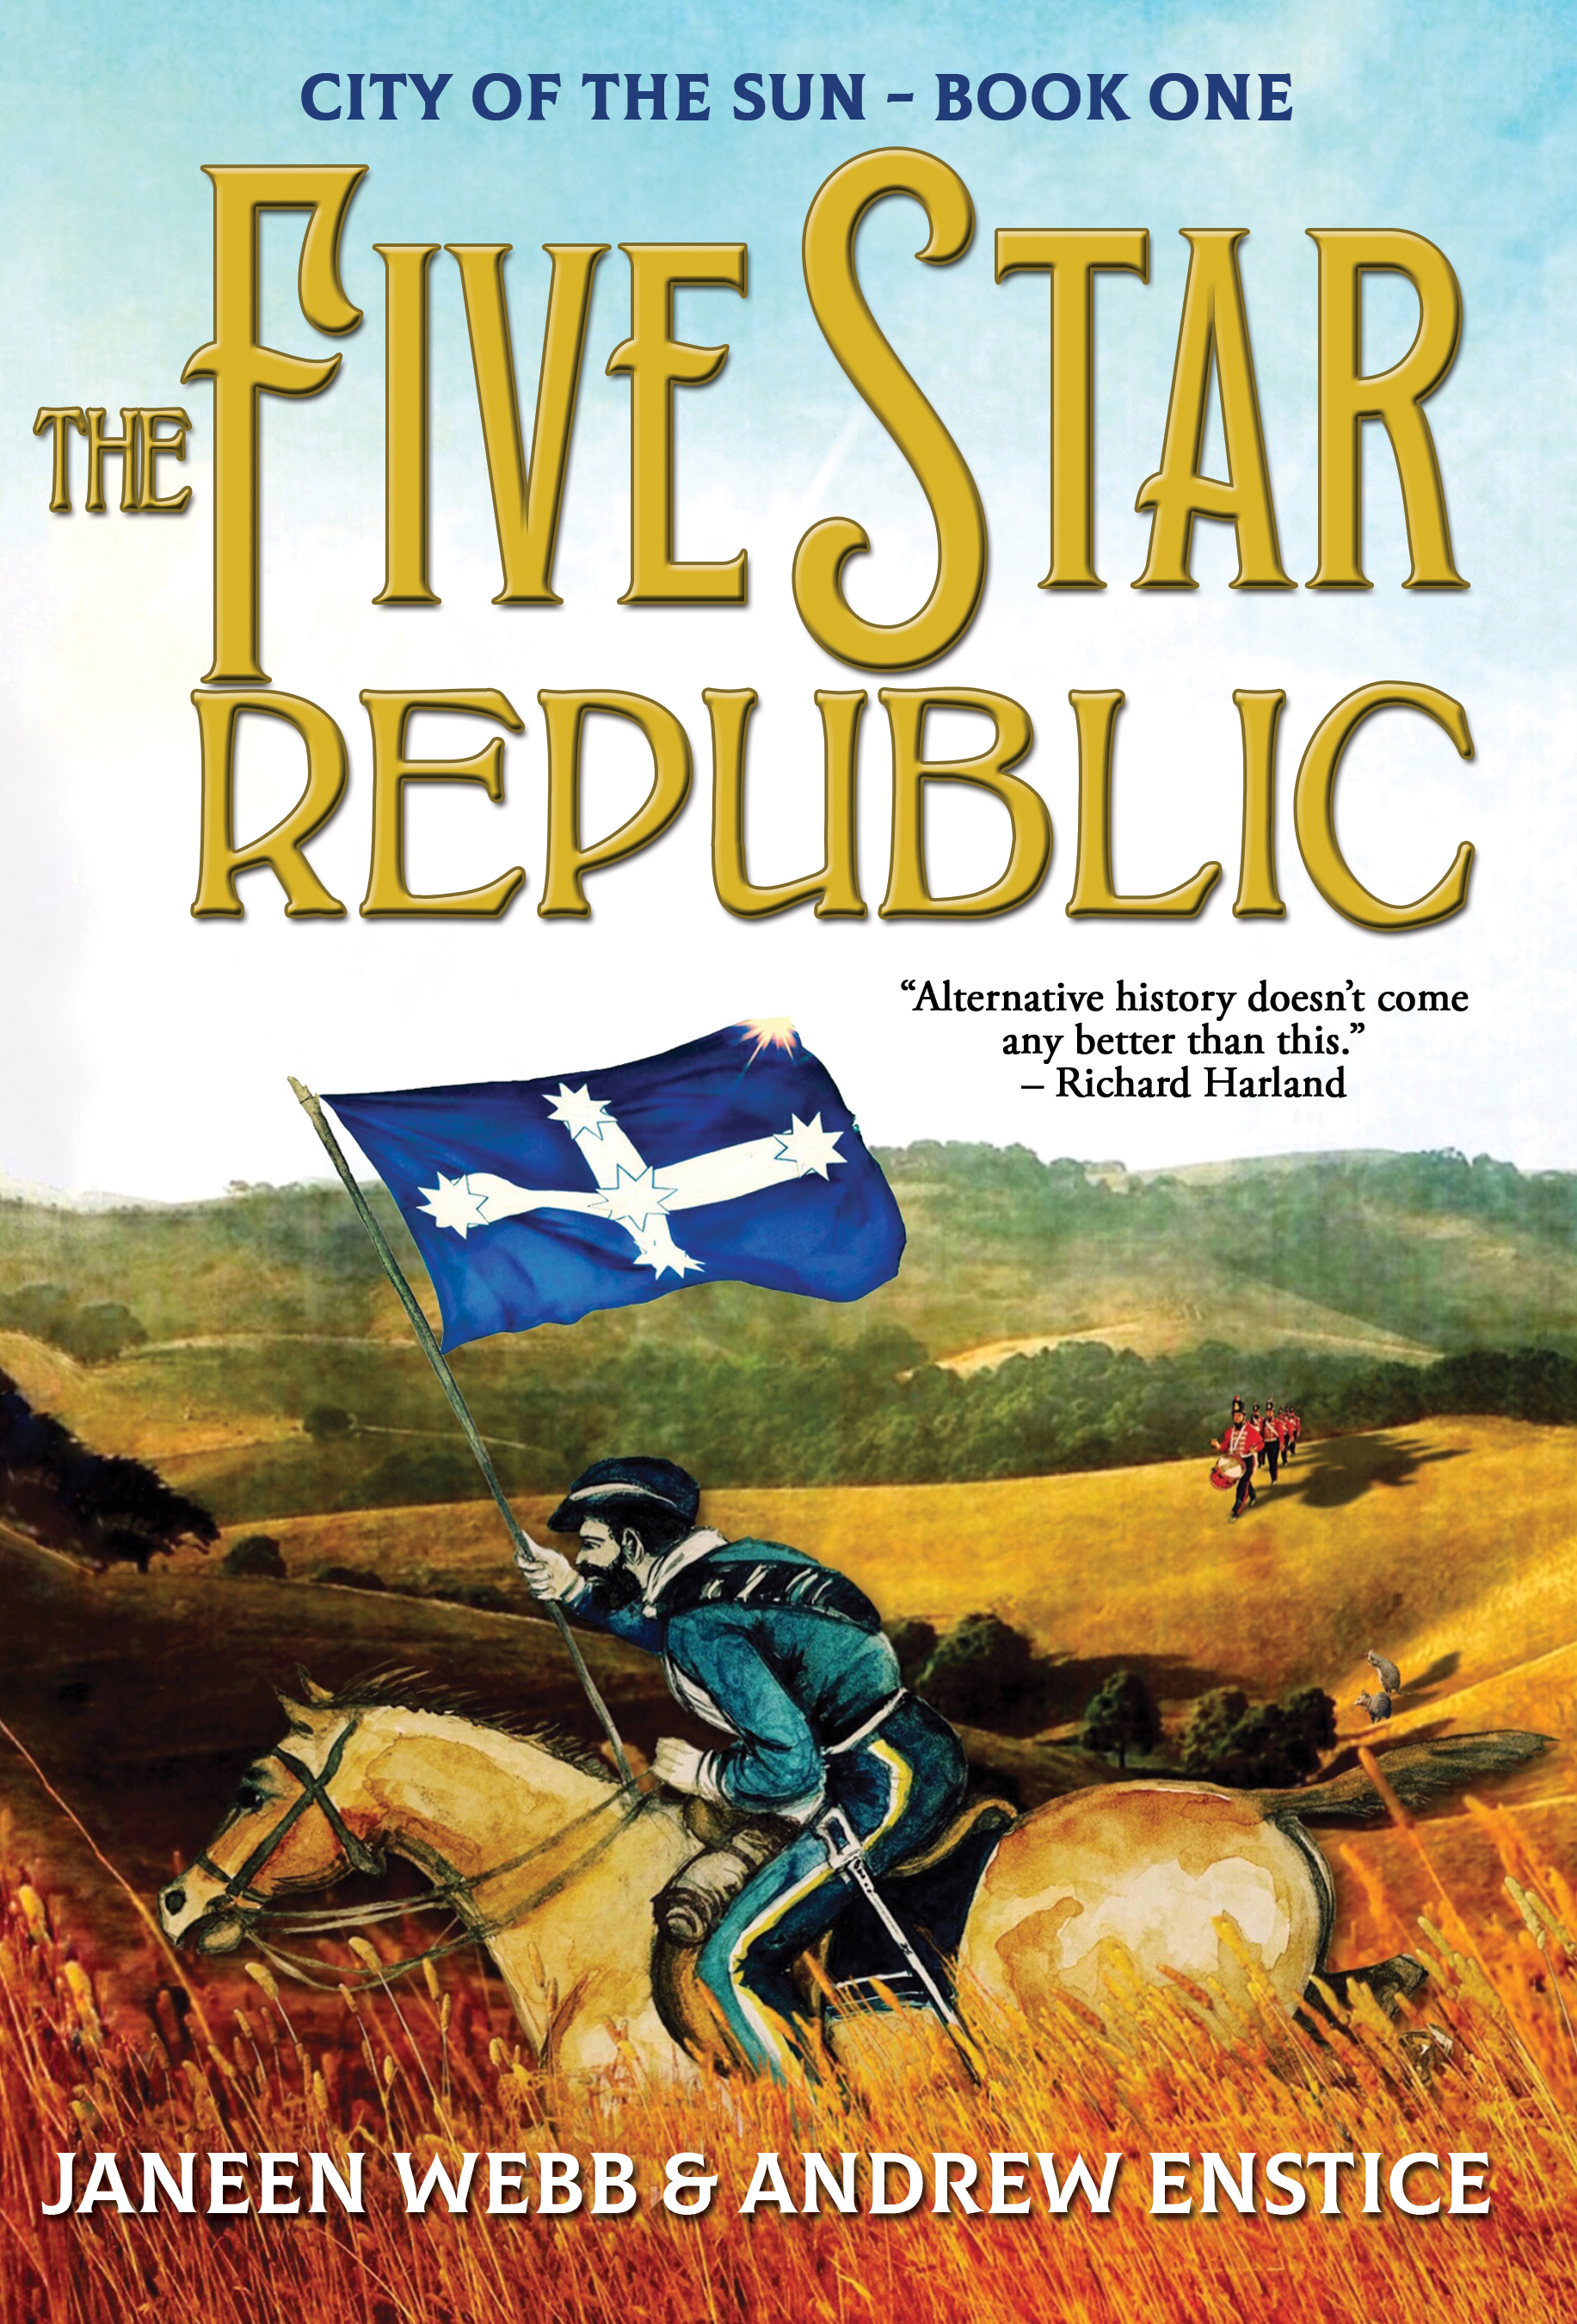 cover image The Five Star Republic: City of the Sun Book One